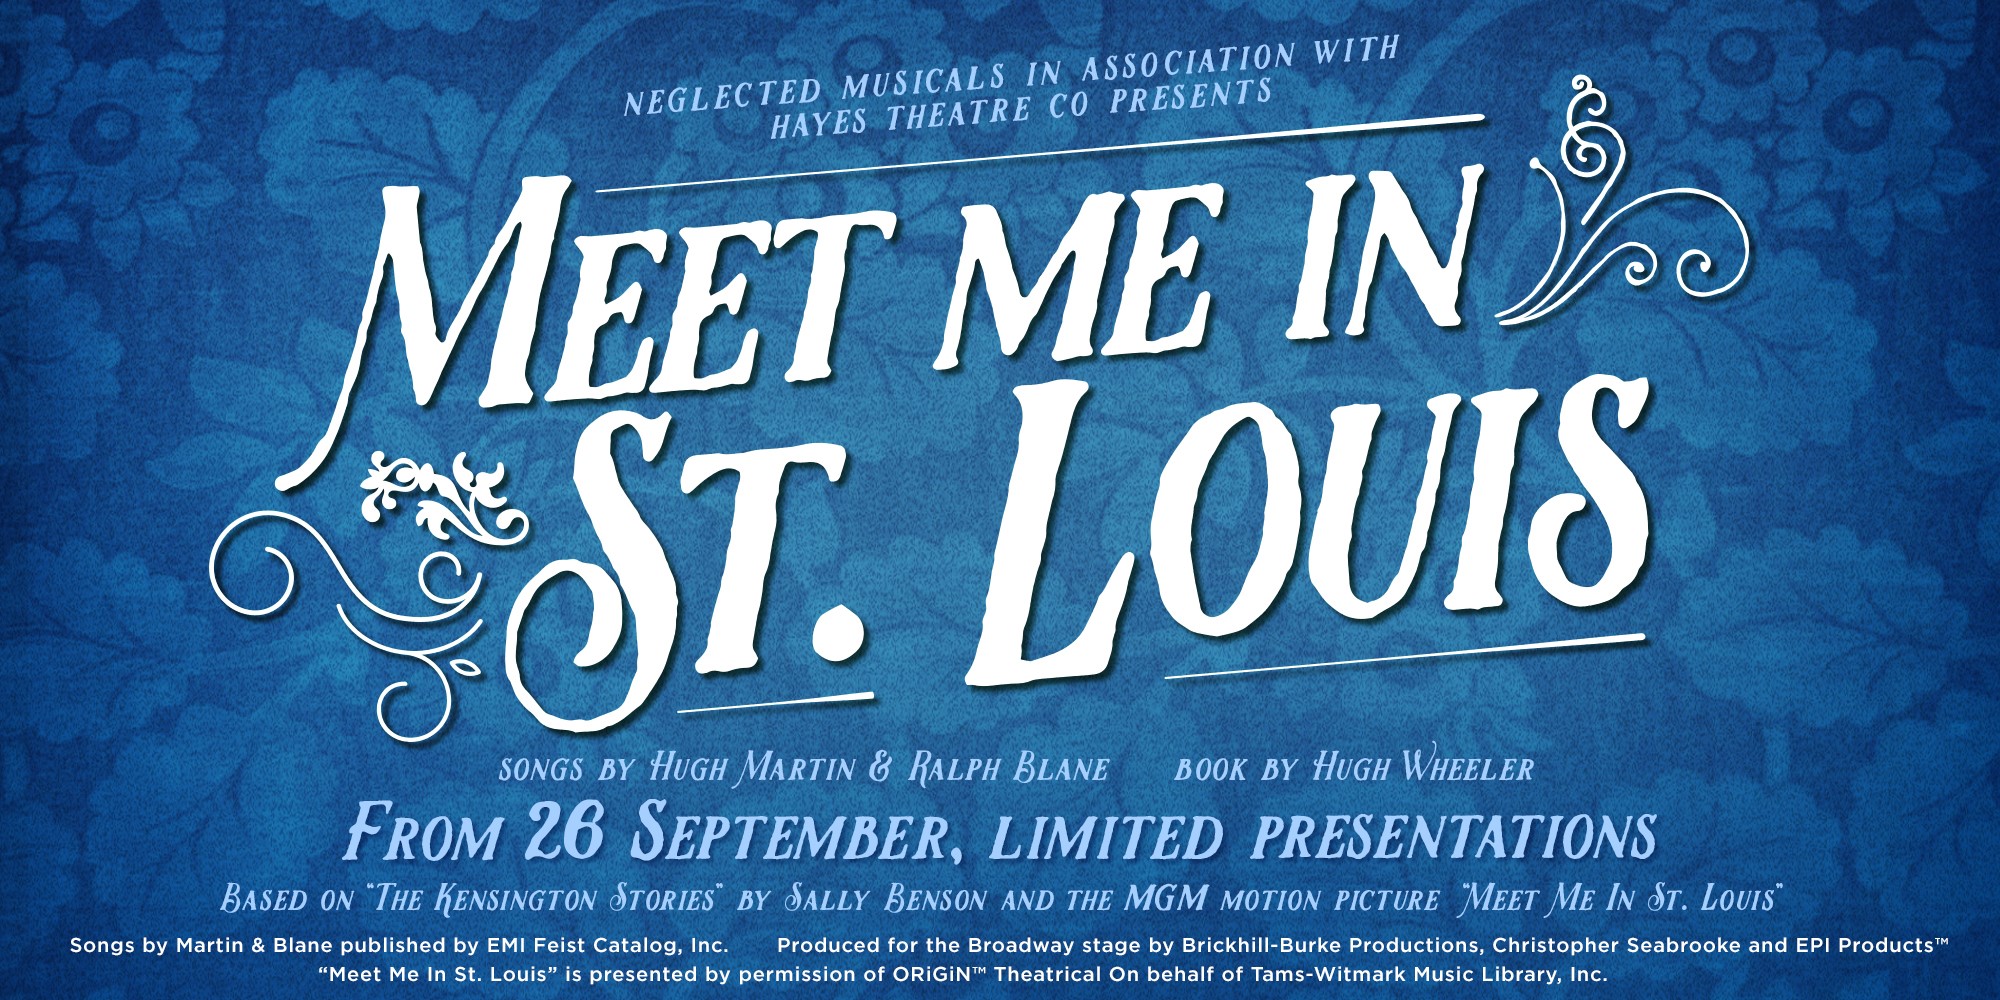 Meet Me In St. Louis – Hayes Theatre Company